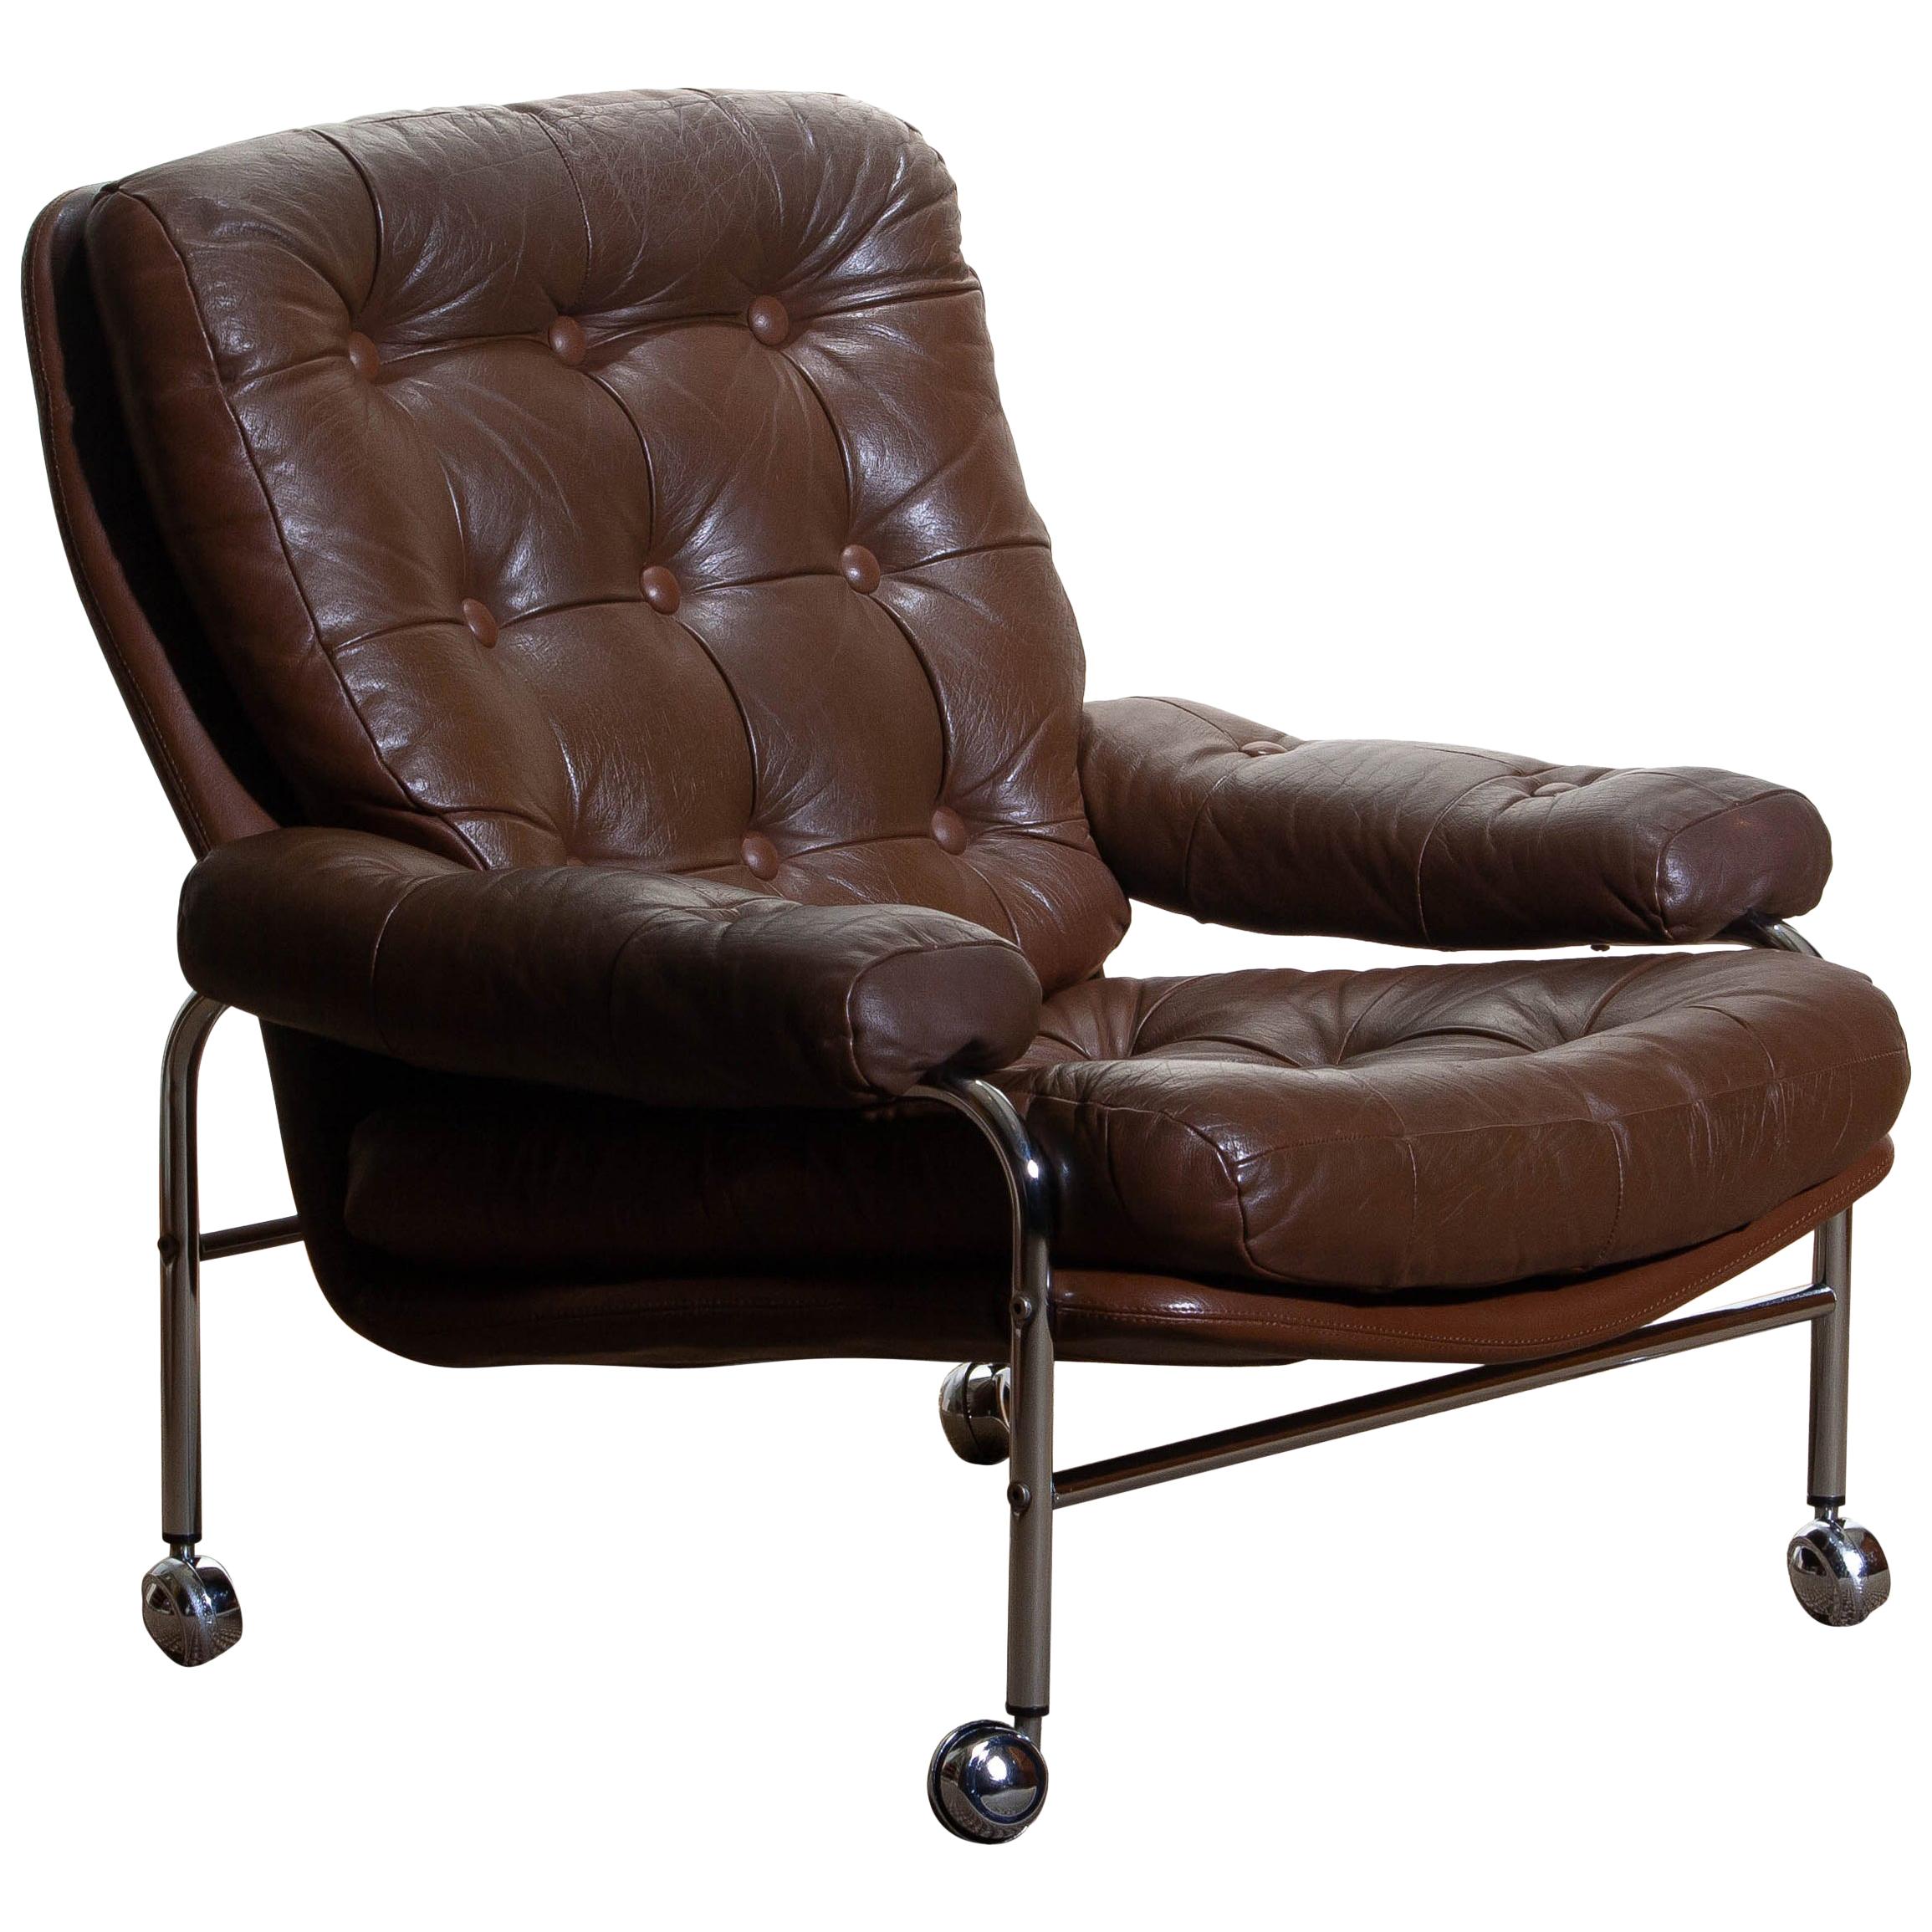 1970s, Chrome and Brown Leather Easy / Lounge Chair by Scapa Rydaholm, Sweden